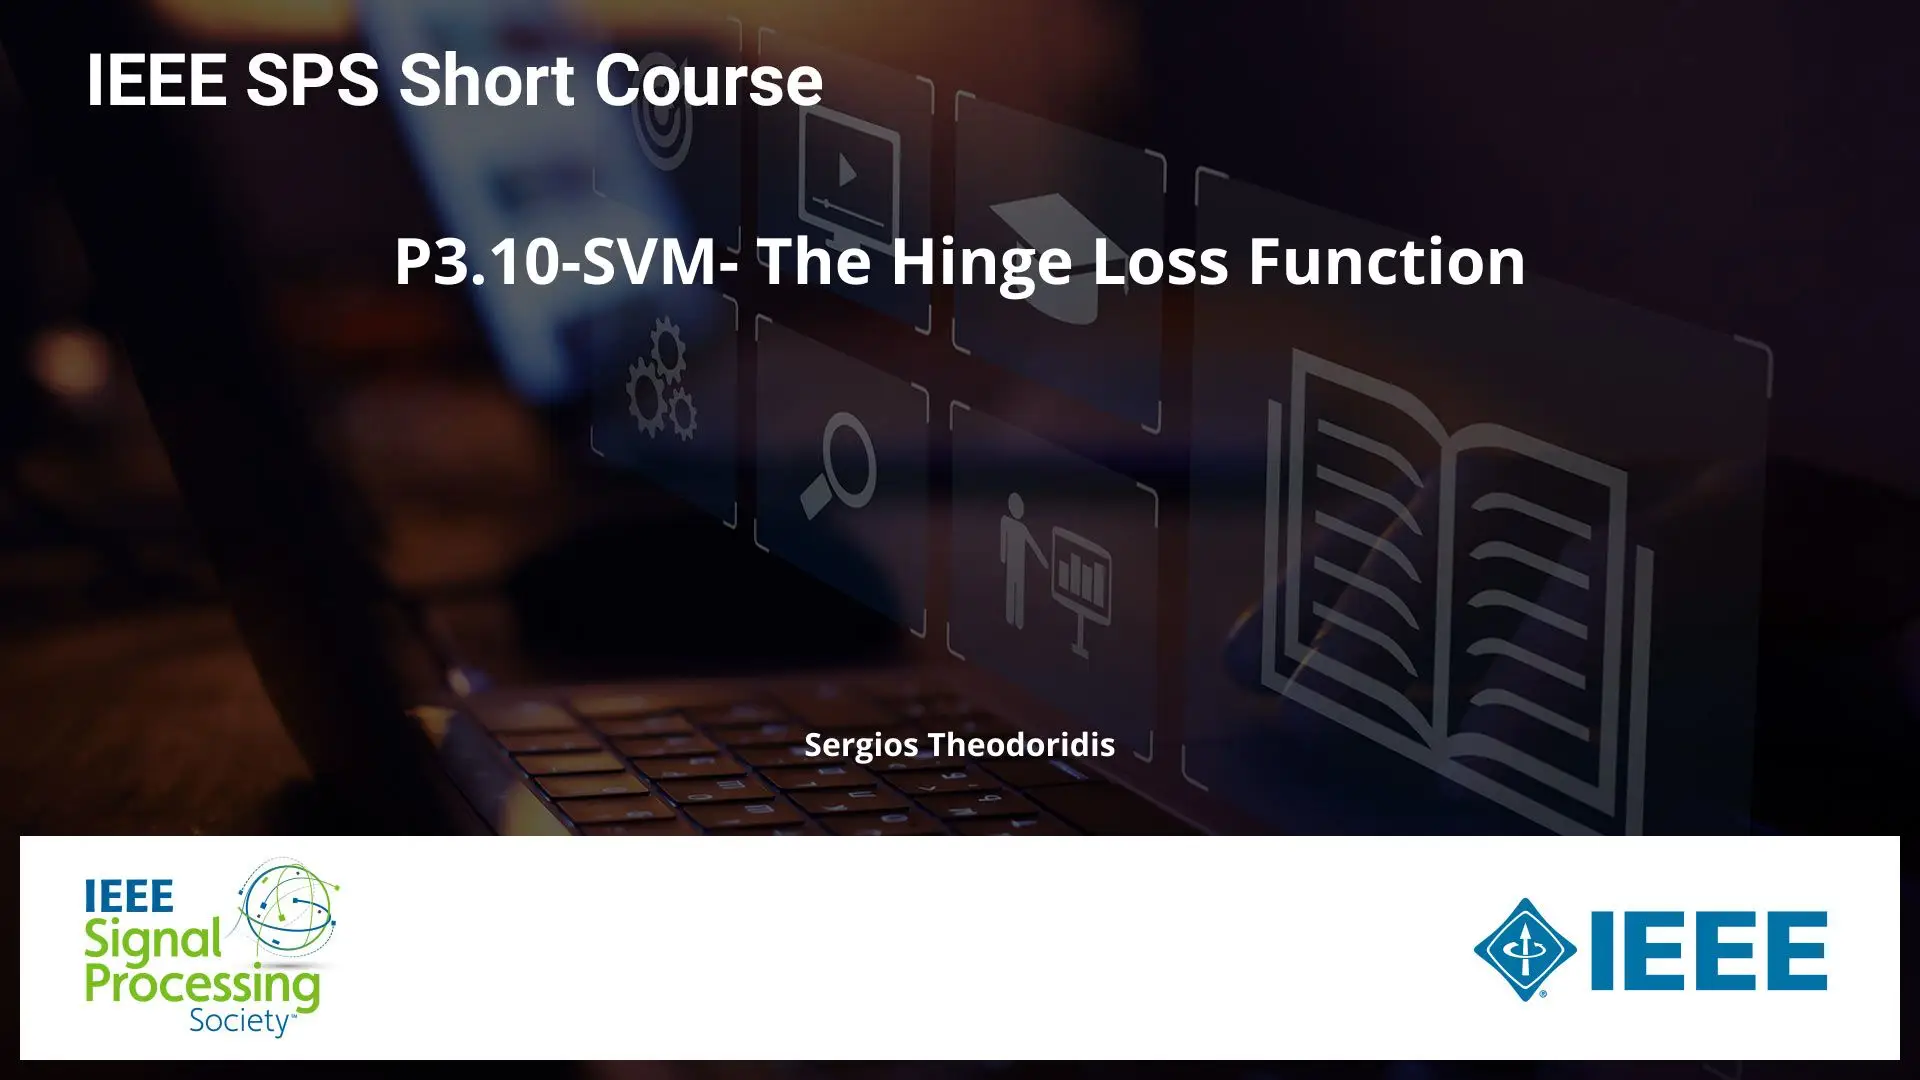 P3.10-SVM- The Hinge Loss Function